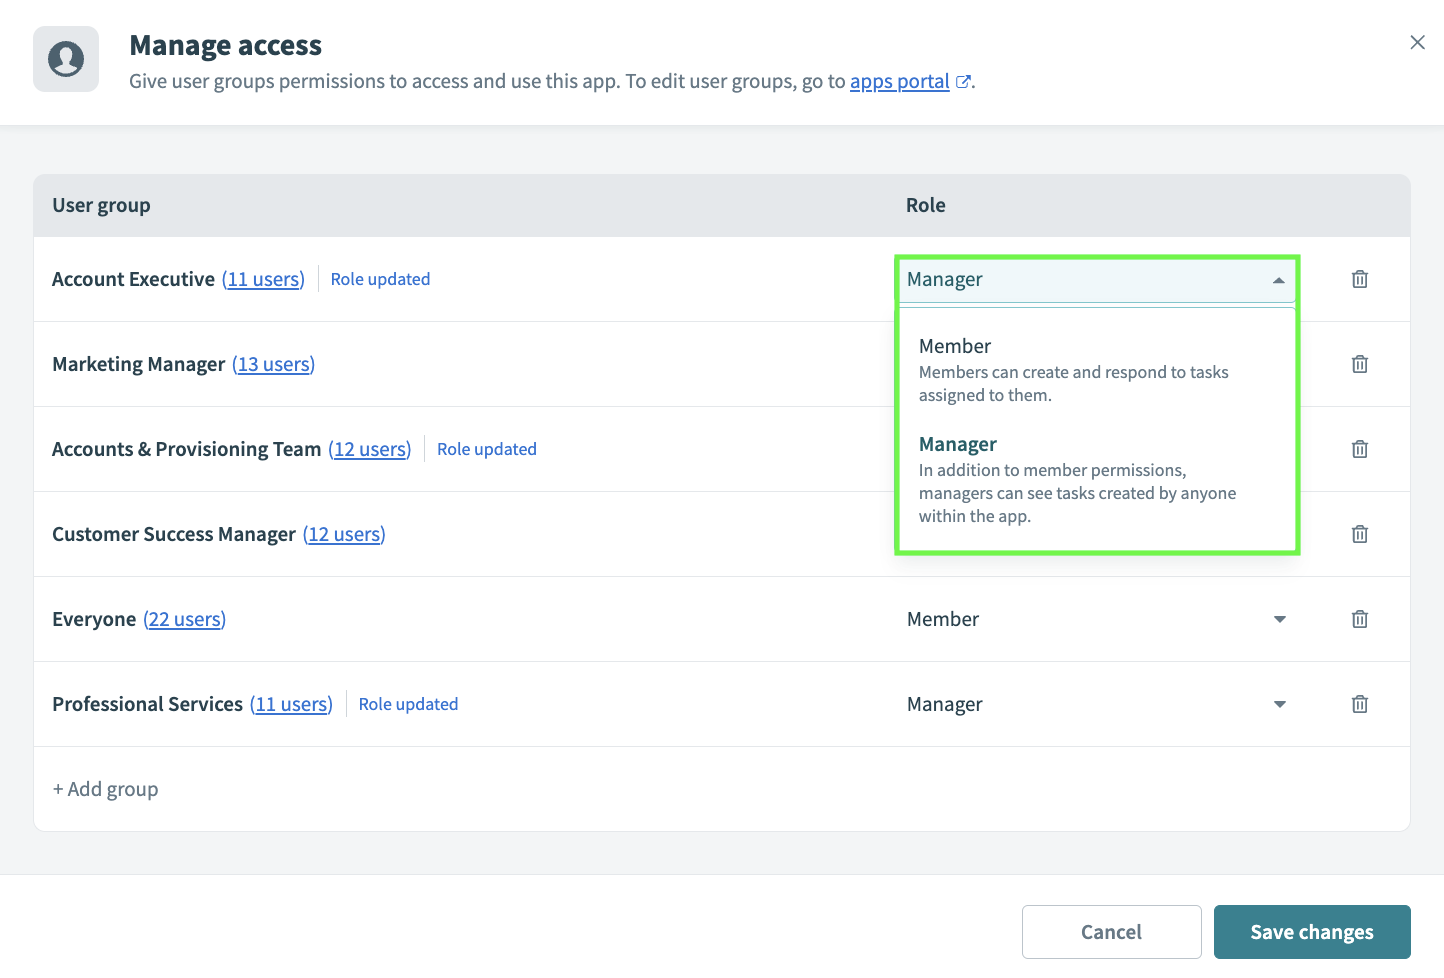 Manage access for user groups